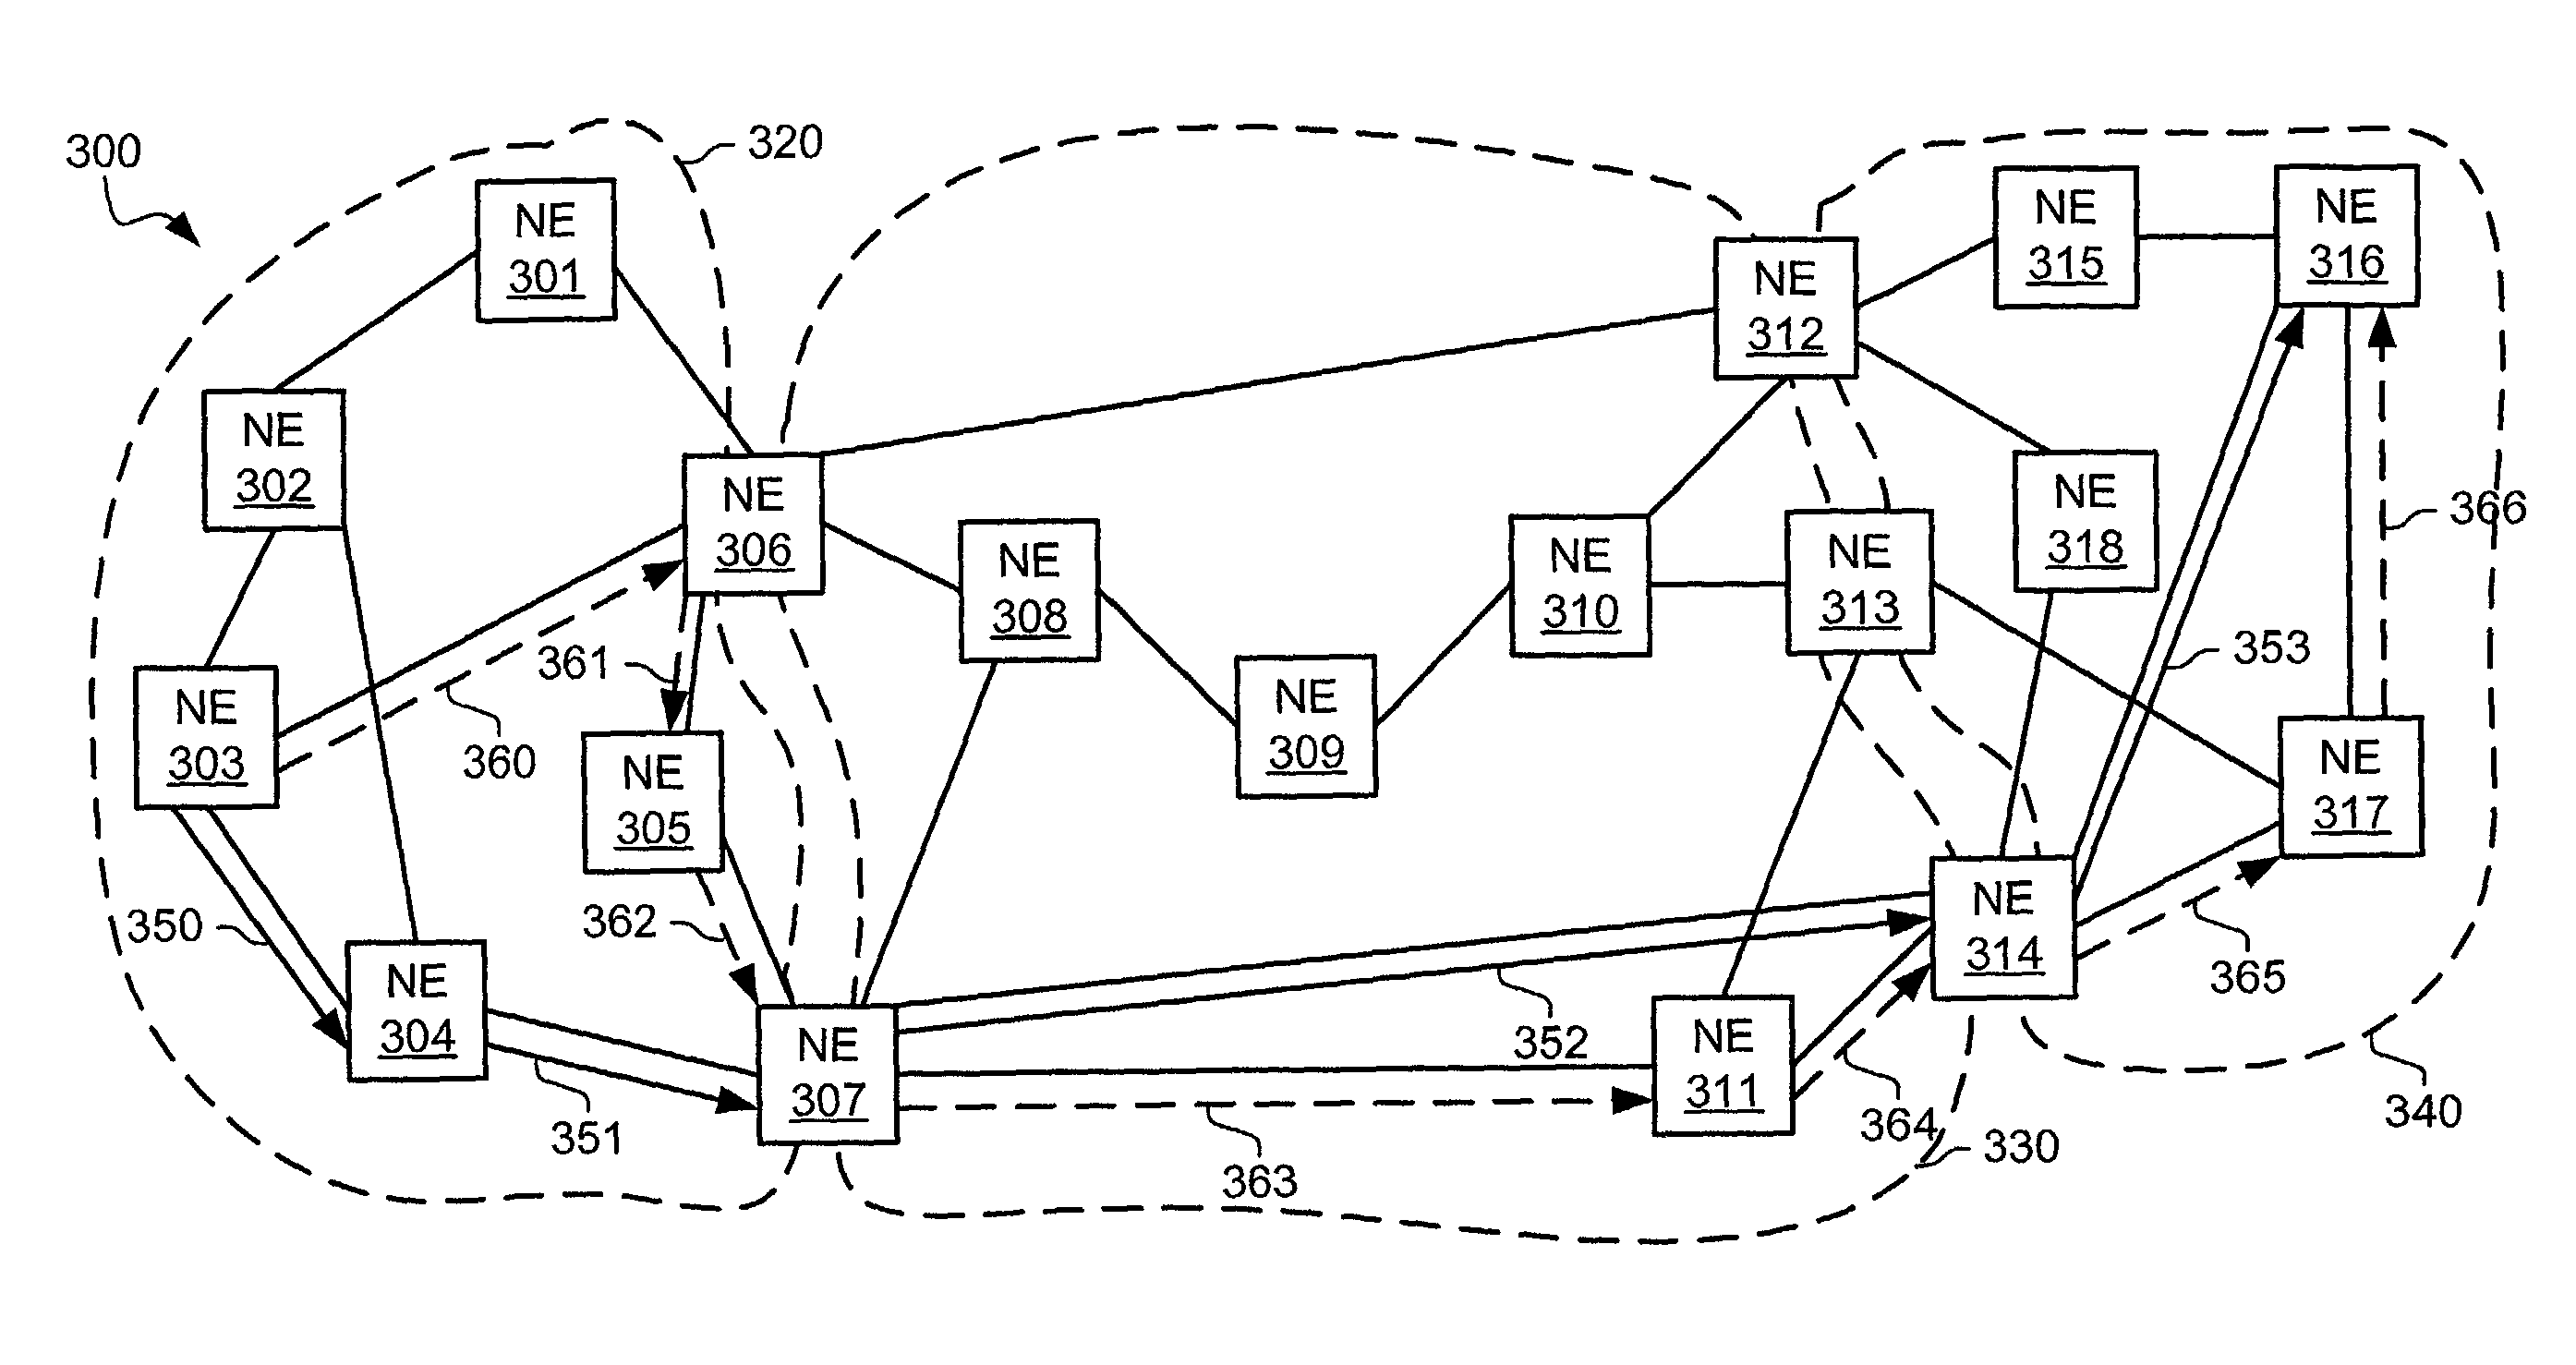 Area based sub-path protection for communication networks